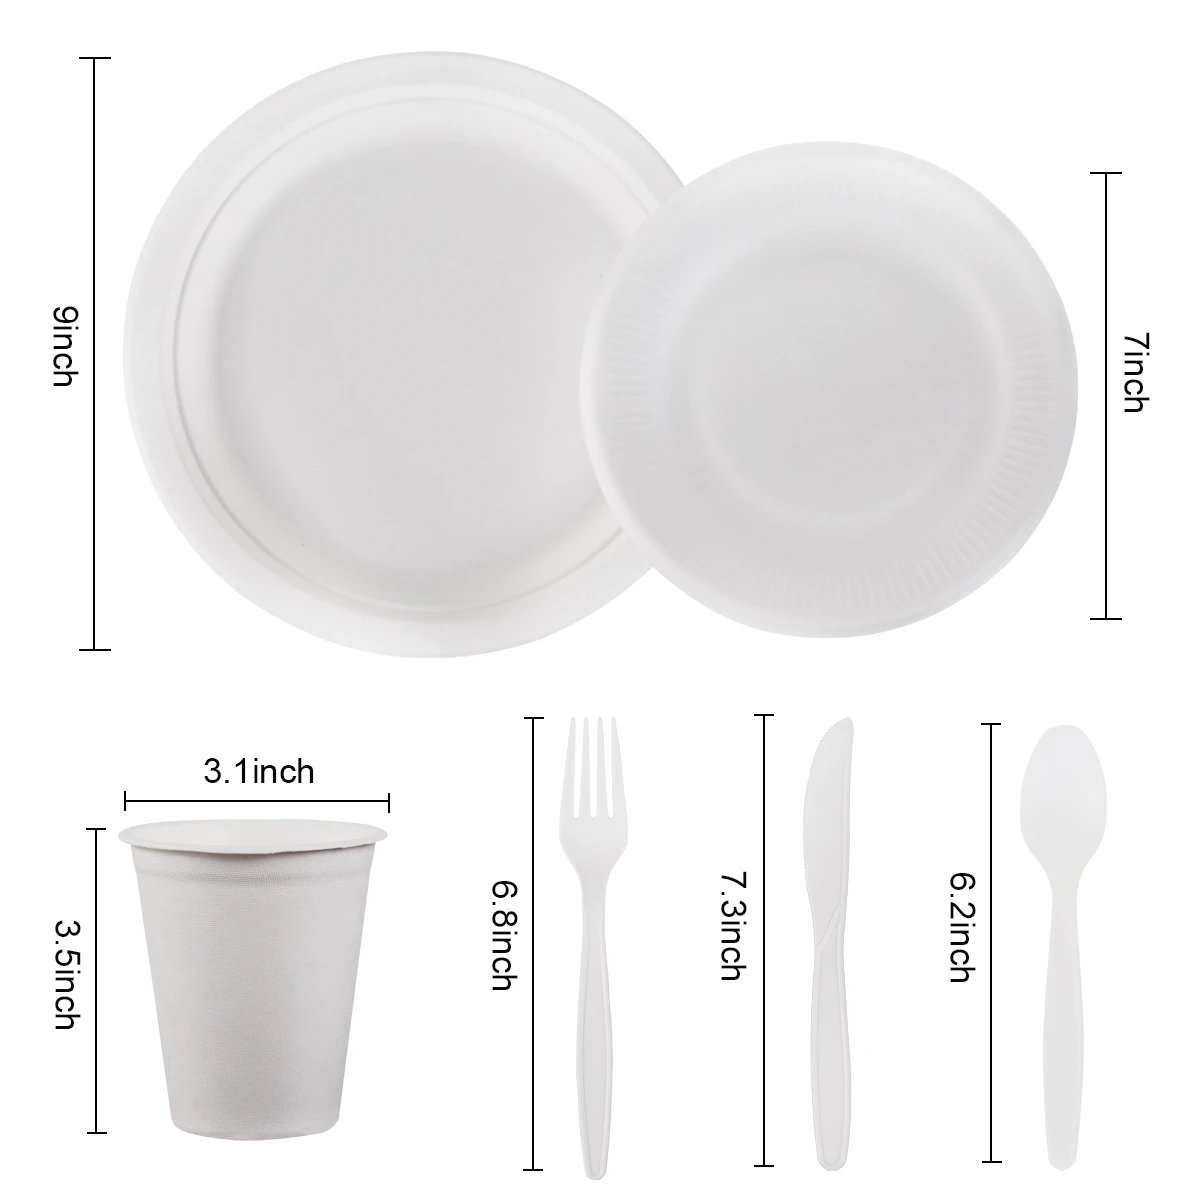 QIFU 300pcs White Degradable Tableware Set Recycling Plastic Plates Knife And Fork Wedding Party Happy Birthday Party Supplies